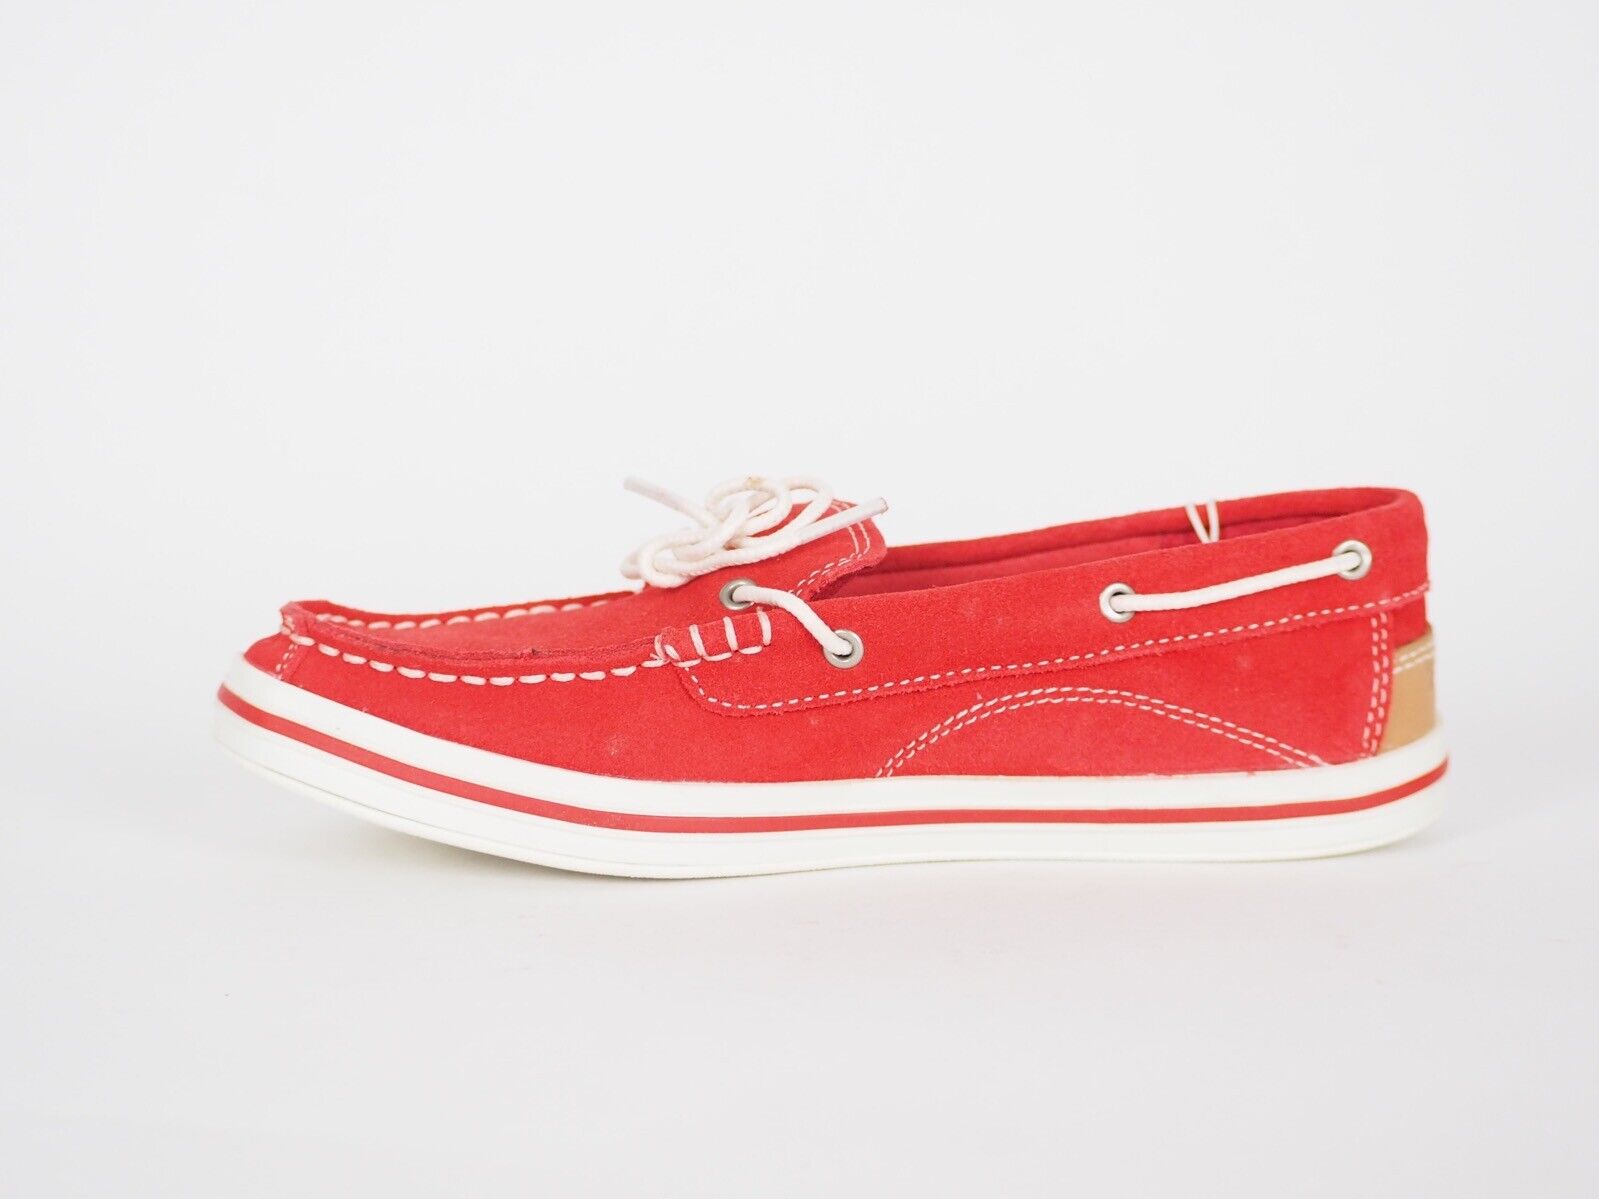 Junior Boys Timberland 7292R Red Suede 1 Eye Deck Boat Shoes - London Top Style